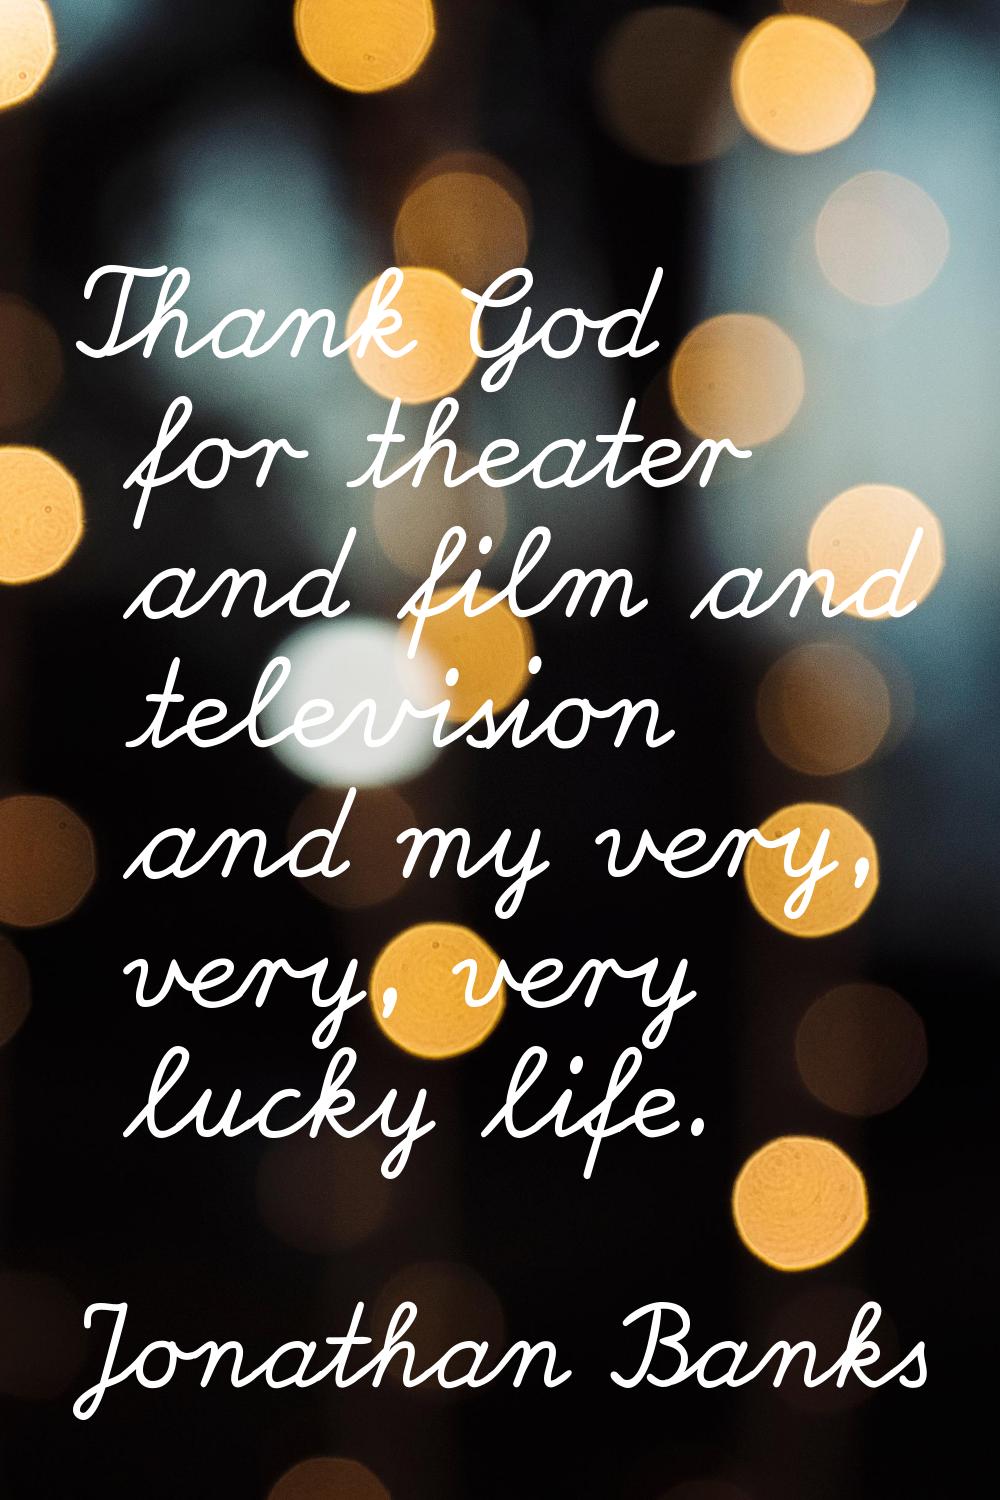 Thank God for theater and film and television and my very, very, very lucky life.